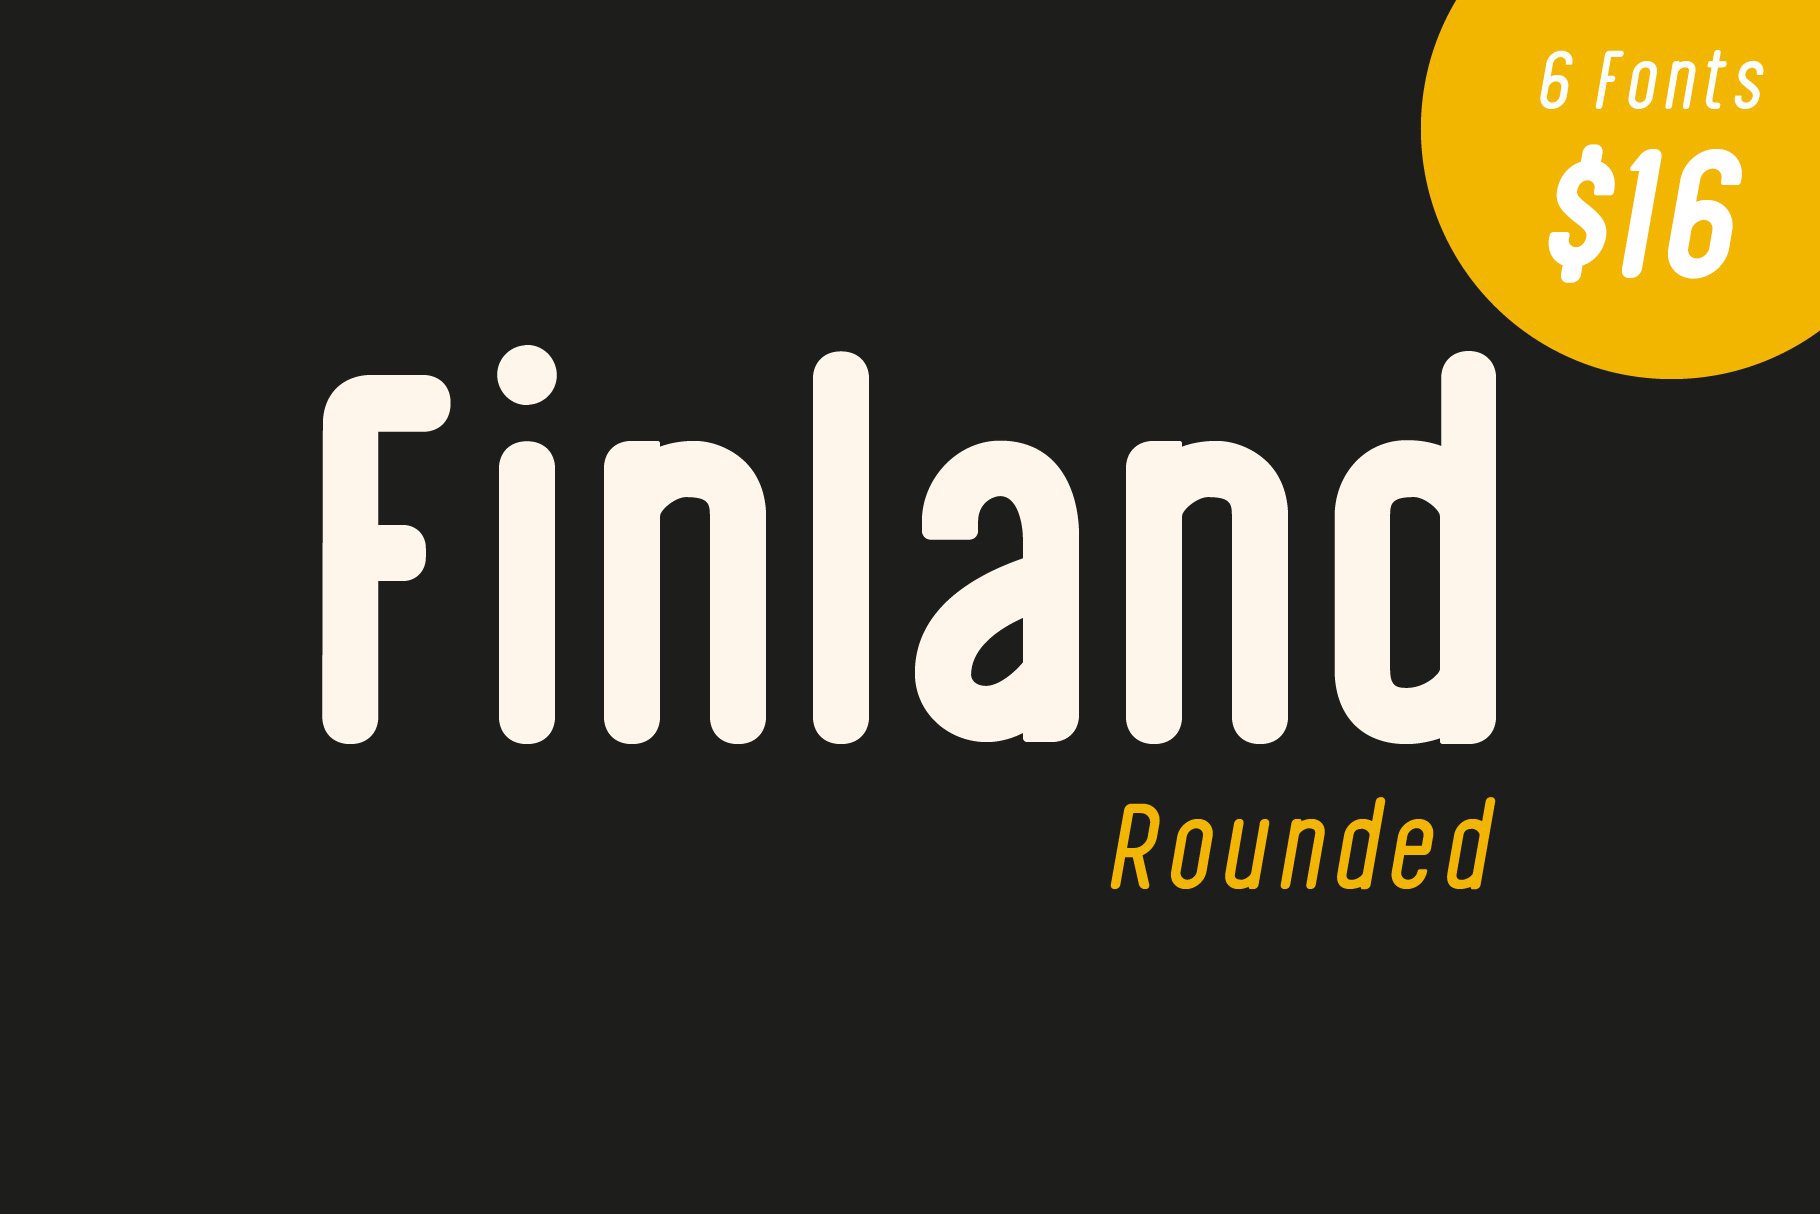 Finland Rounded - Font Family cover image.